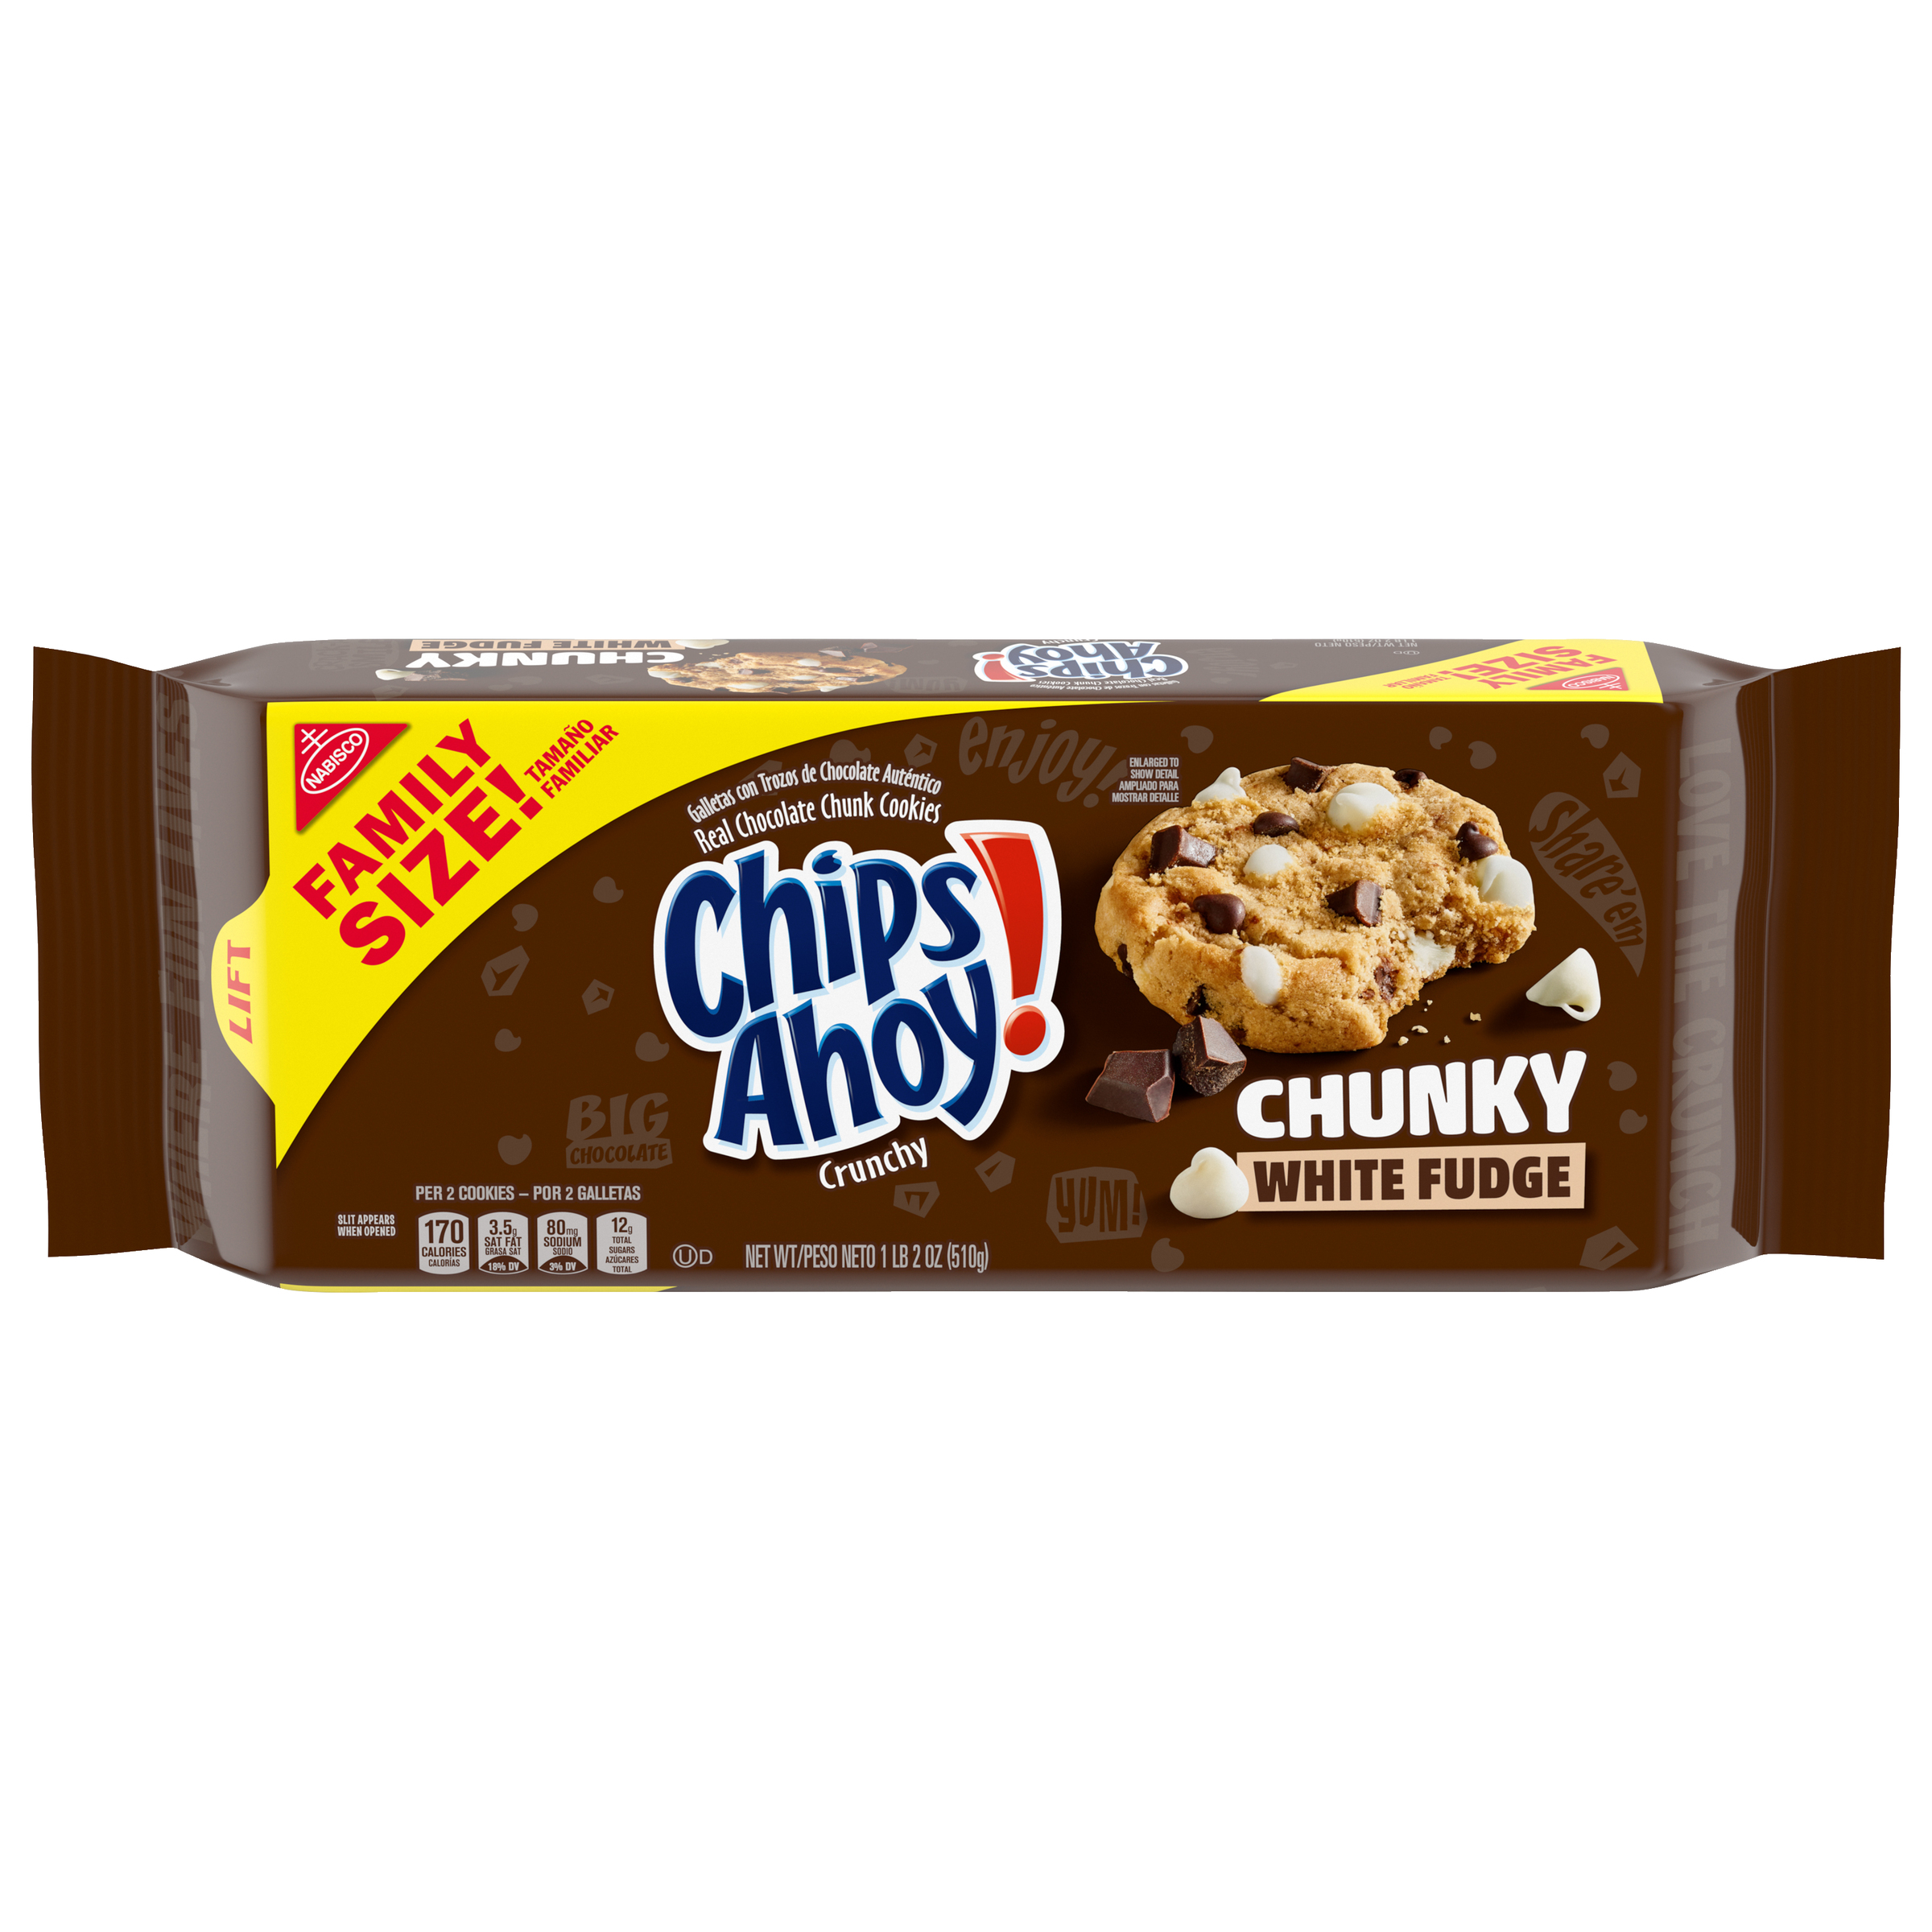 CHIPS AHOY! Chunky Cookies 1.13 LB